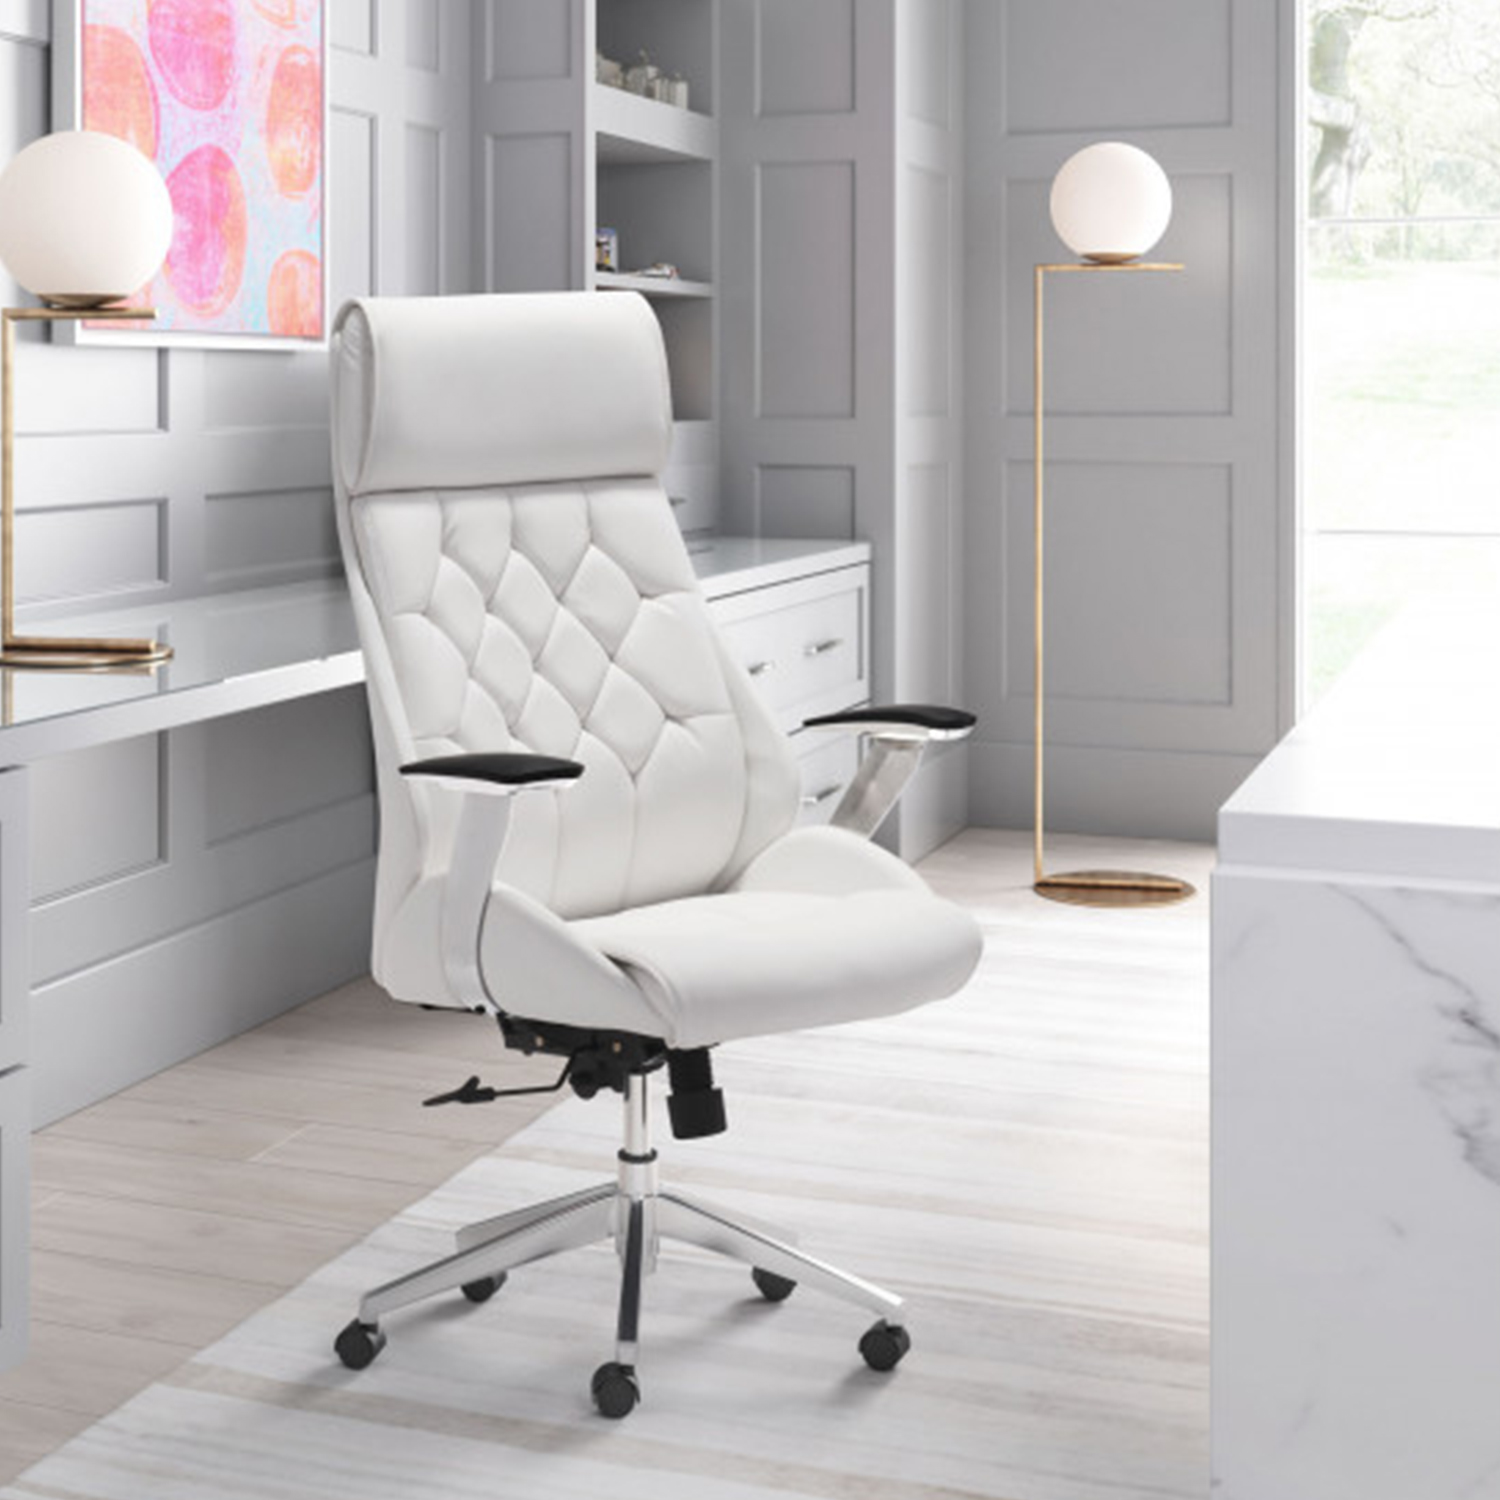 28.7" X 29" X 46.6" White Leatherette Office Chair